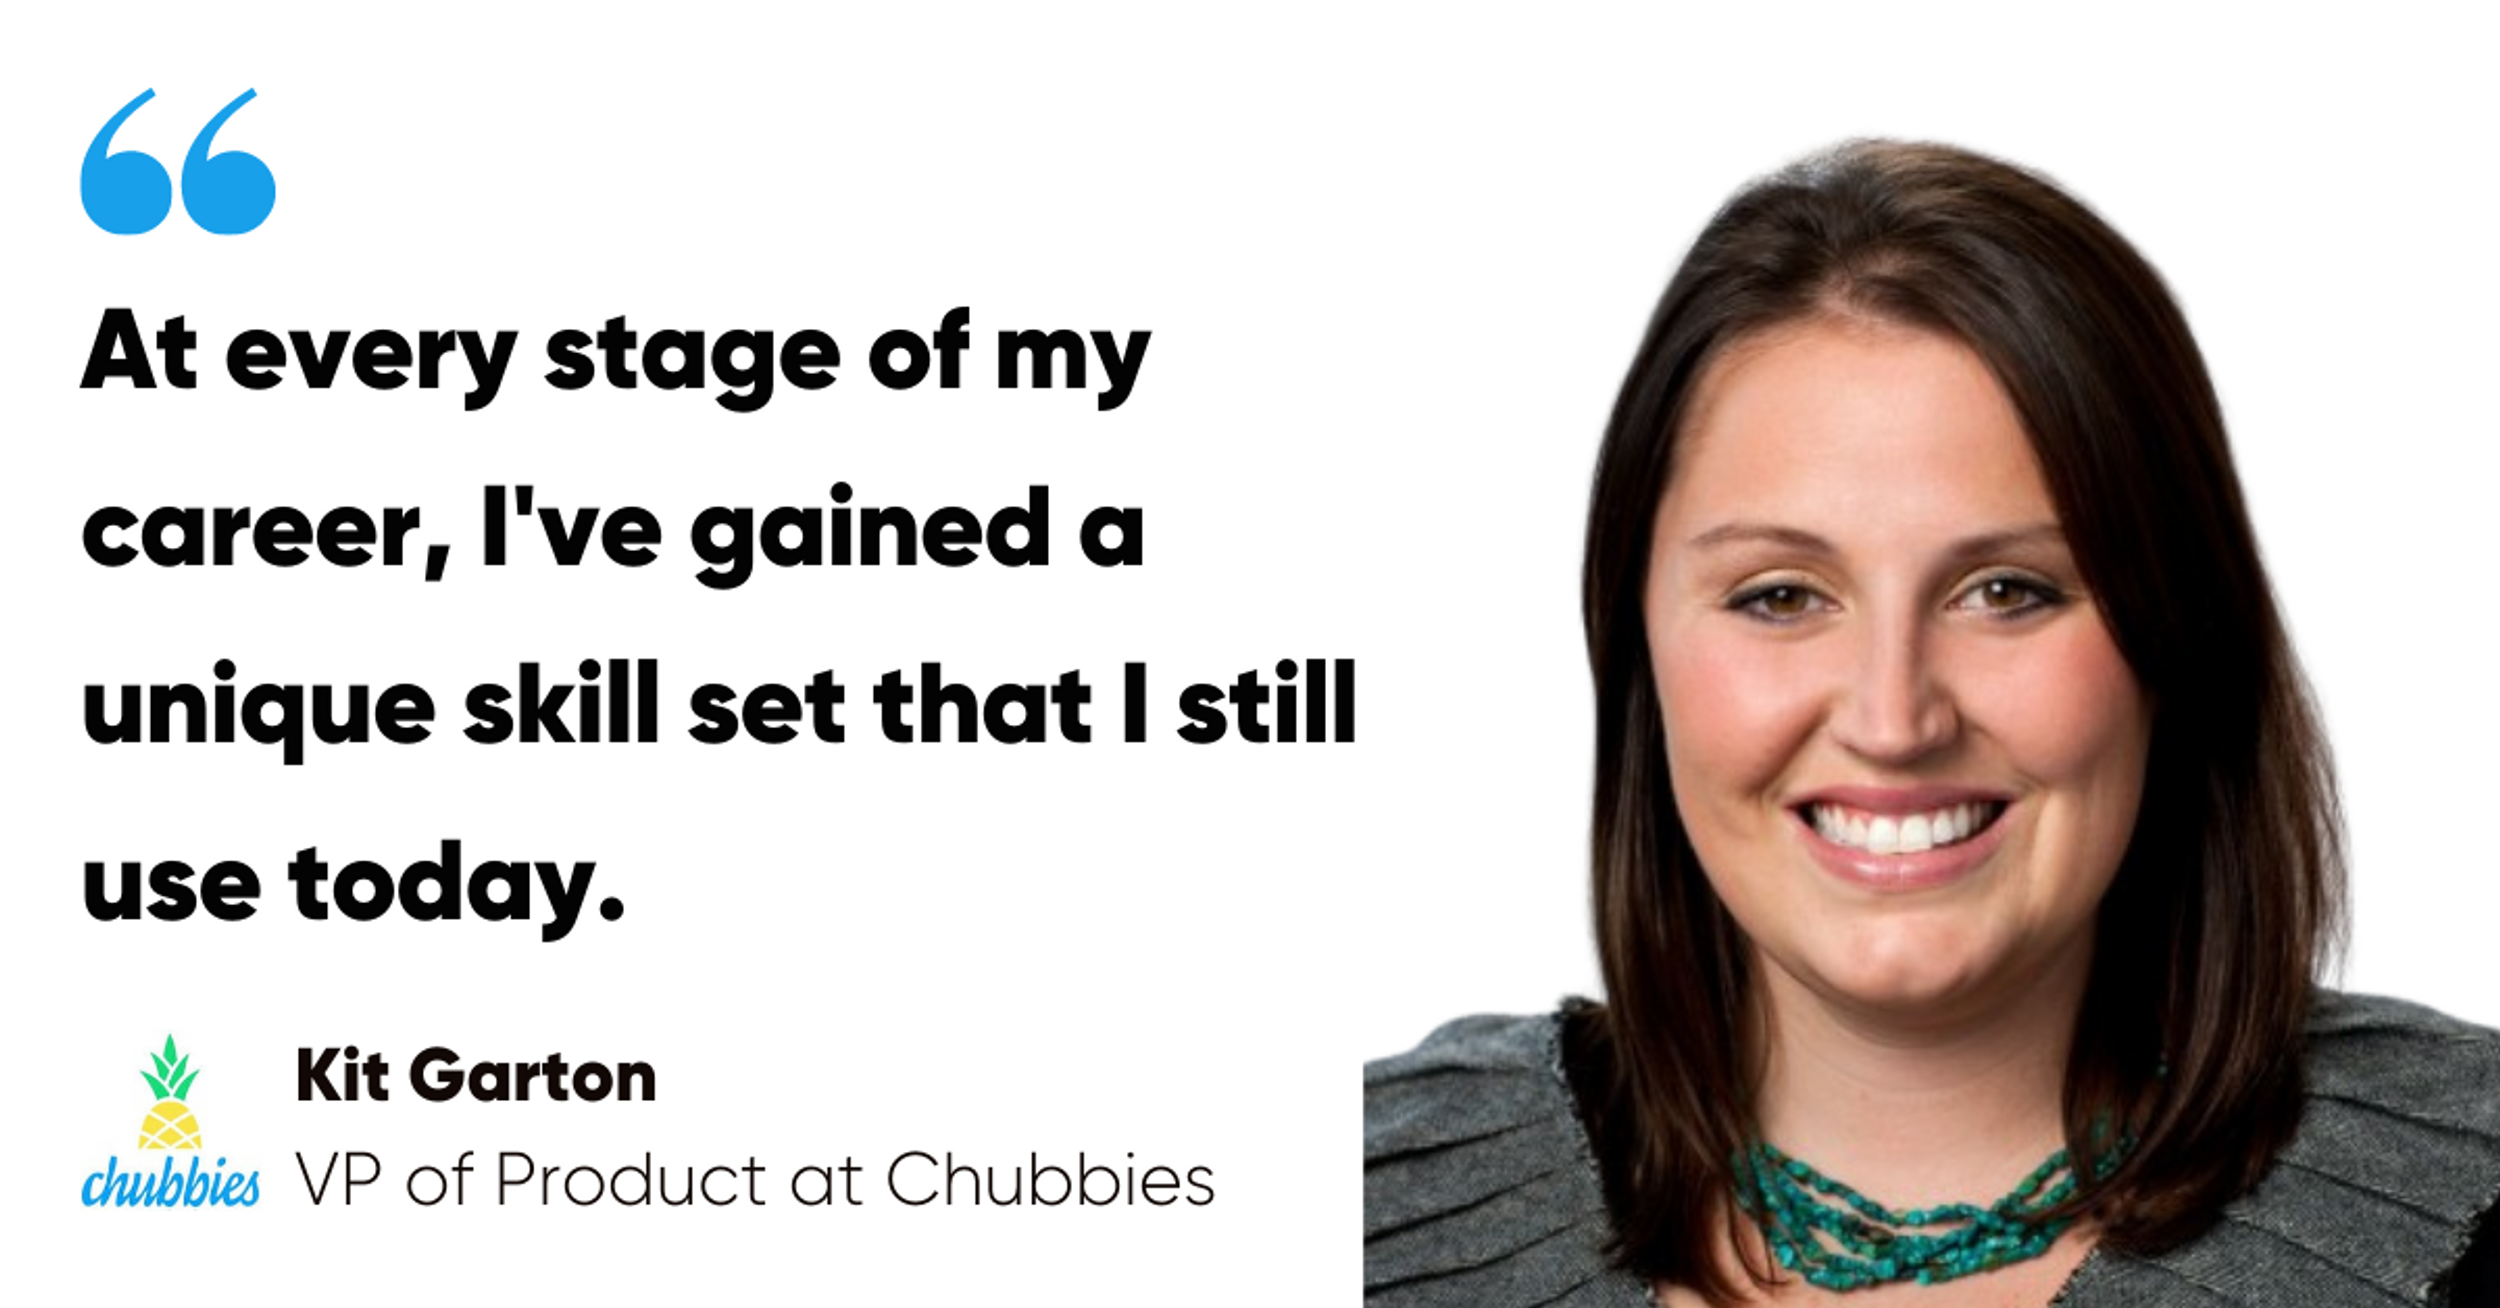 From Events Coordinator to VP of Product: Chubbies' Kit Garton on Creating the Career You Want